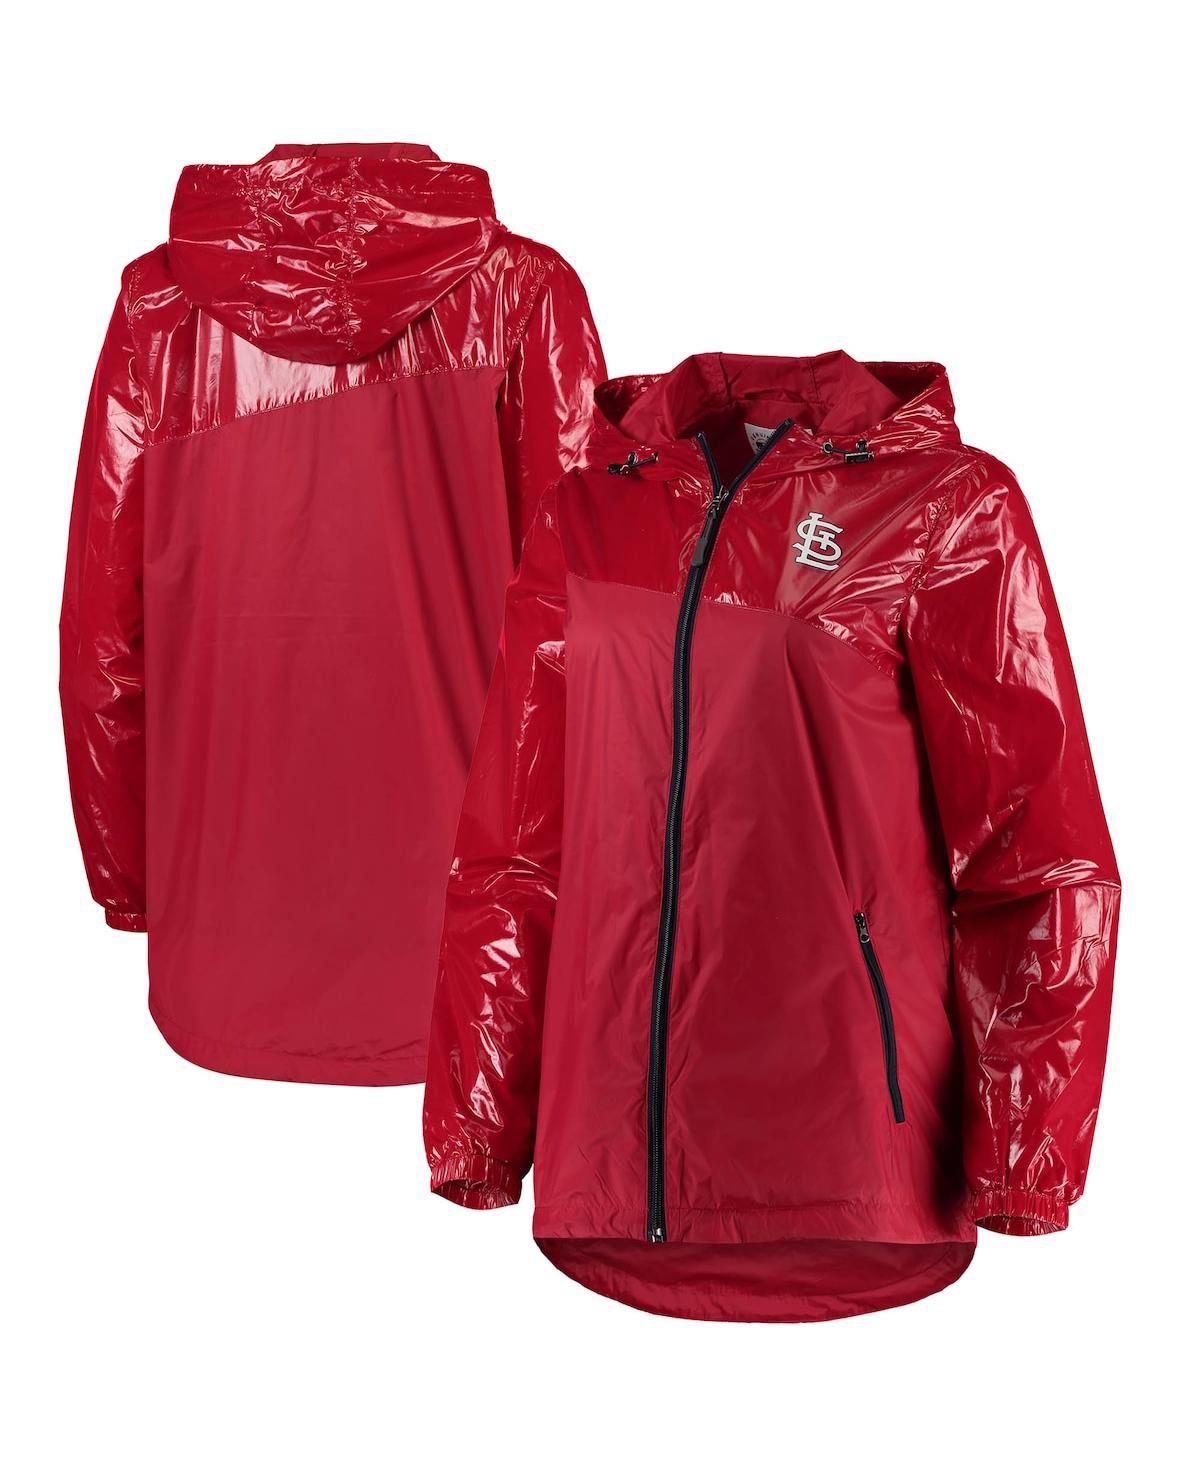 Women's G-iii 4Her by Carl Banks Red St. Louis Cardinals Double Coverage Full-Zip Hoodie Jacket - Red